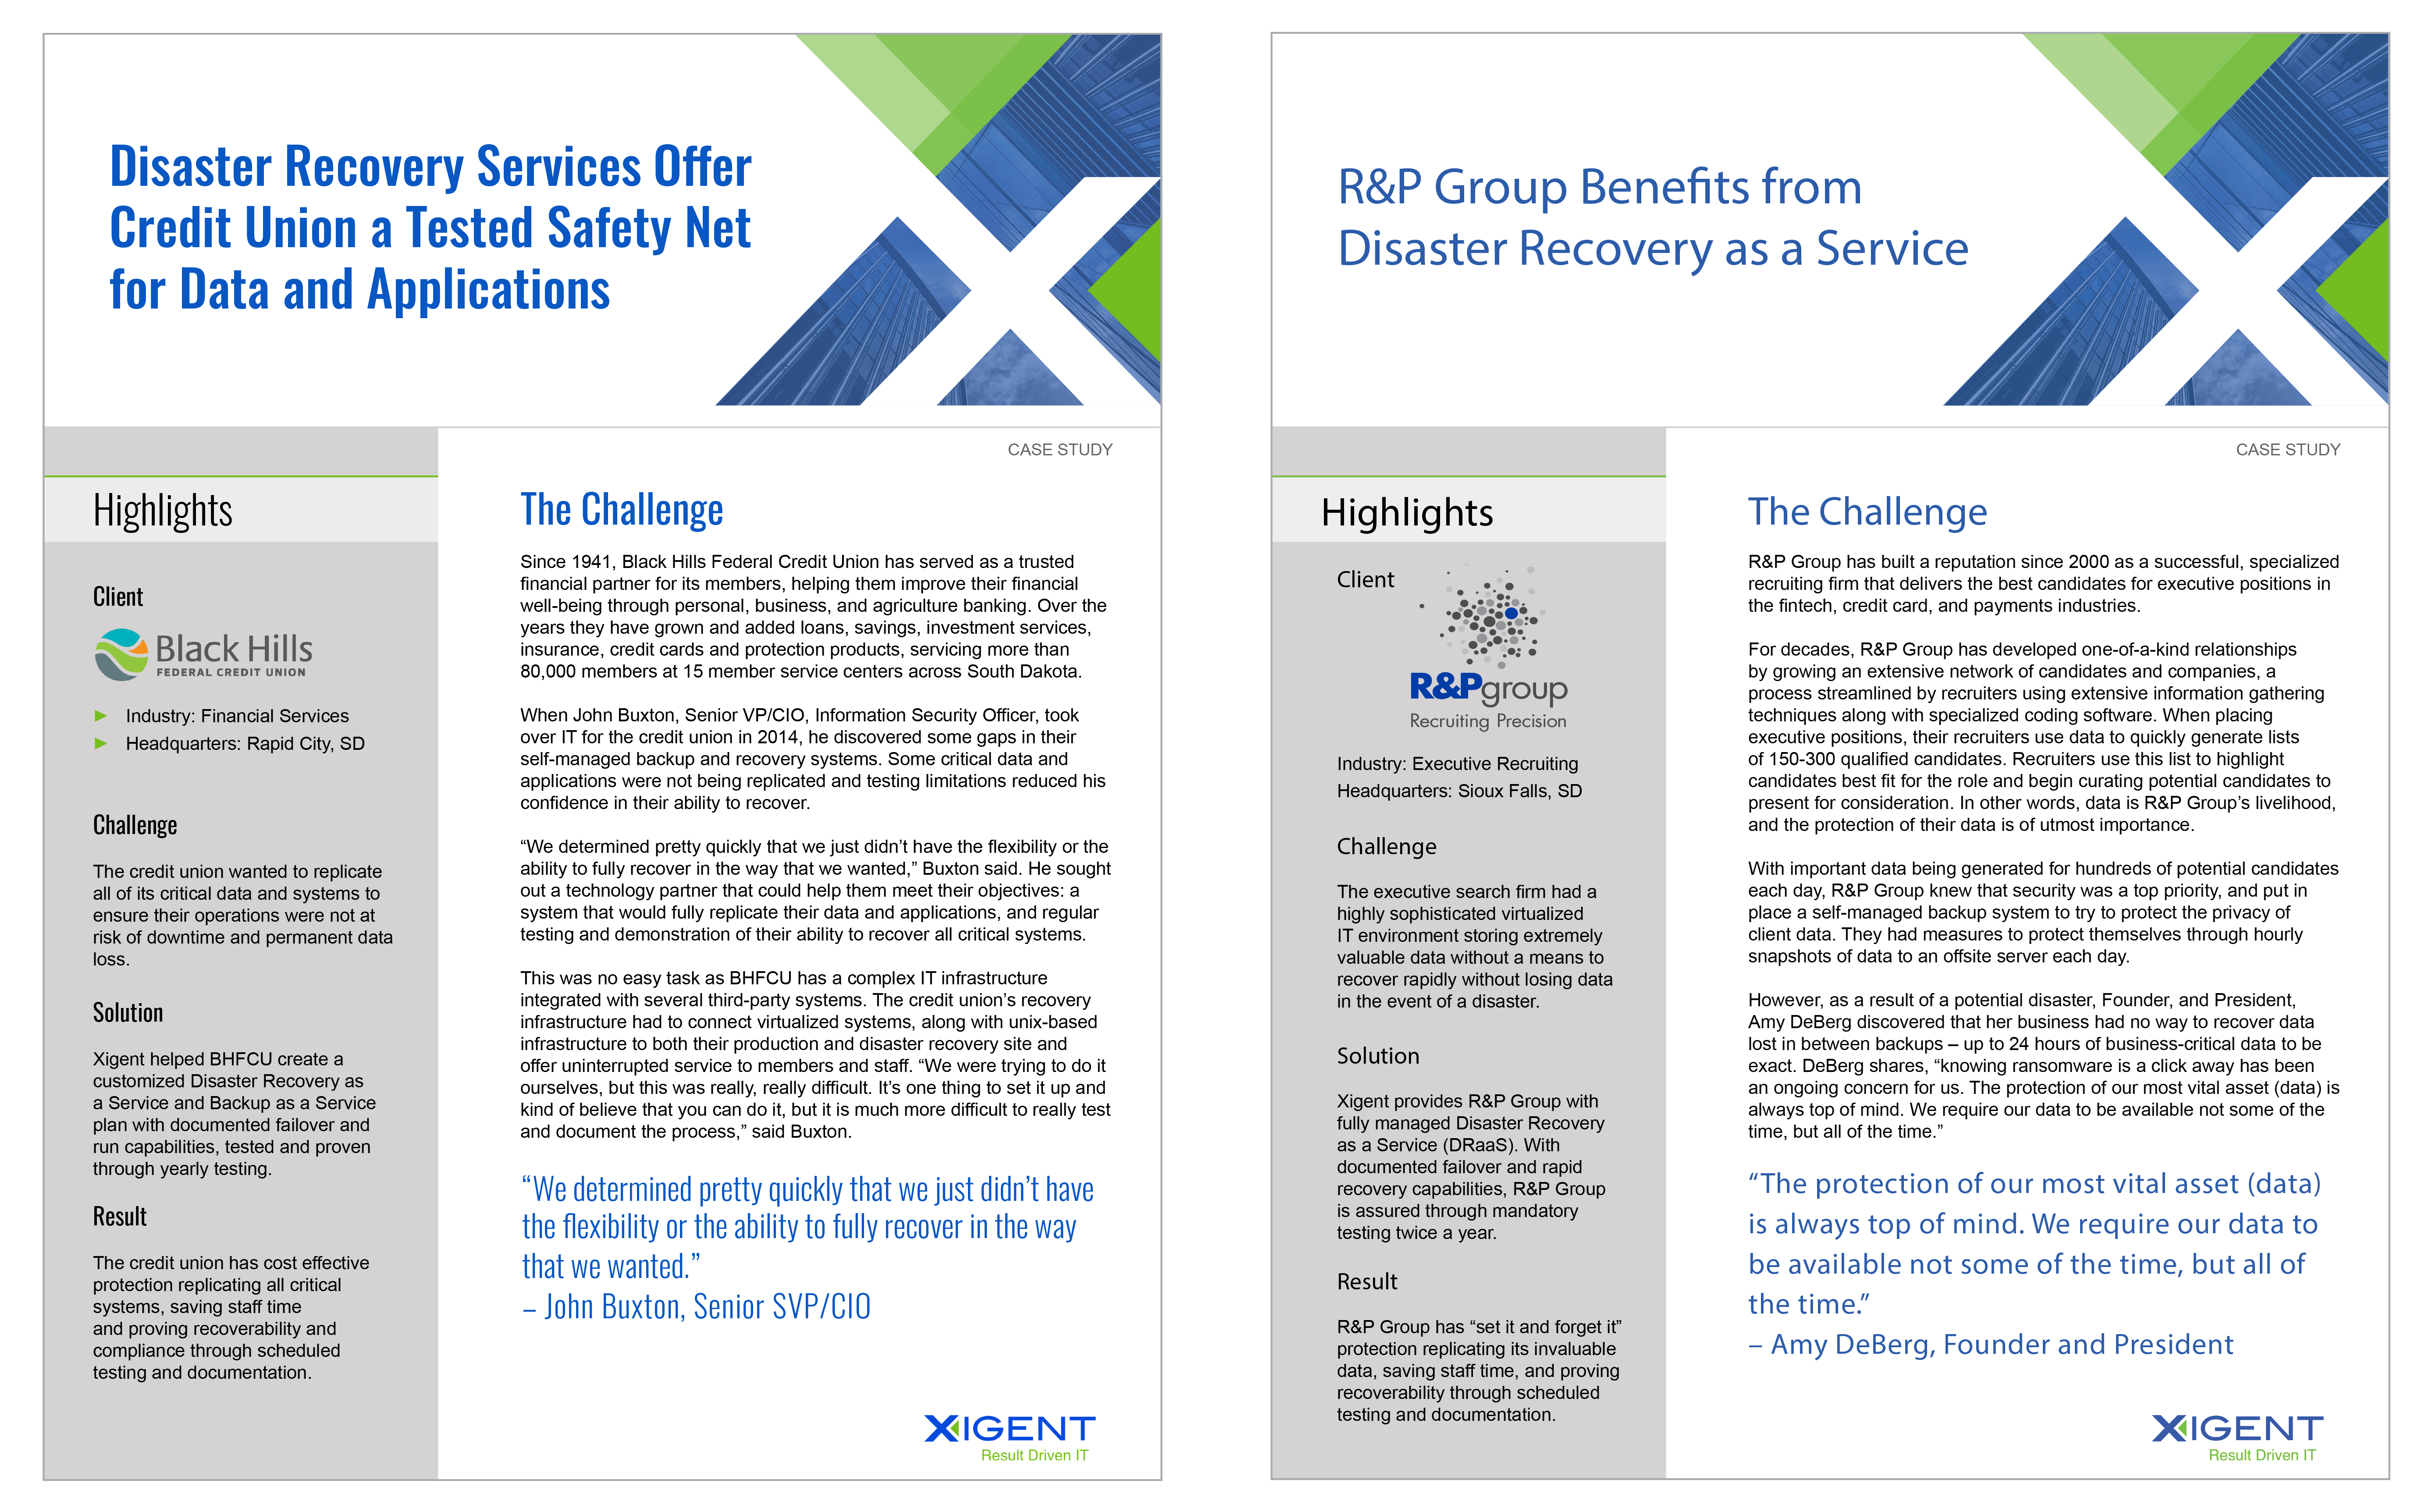 Xigent Disaster Recovery as a Service Case Study Thumbnails